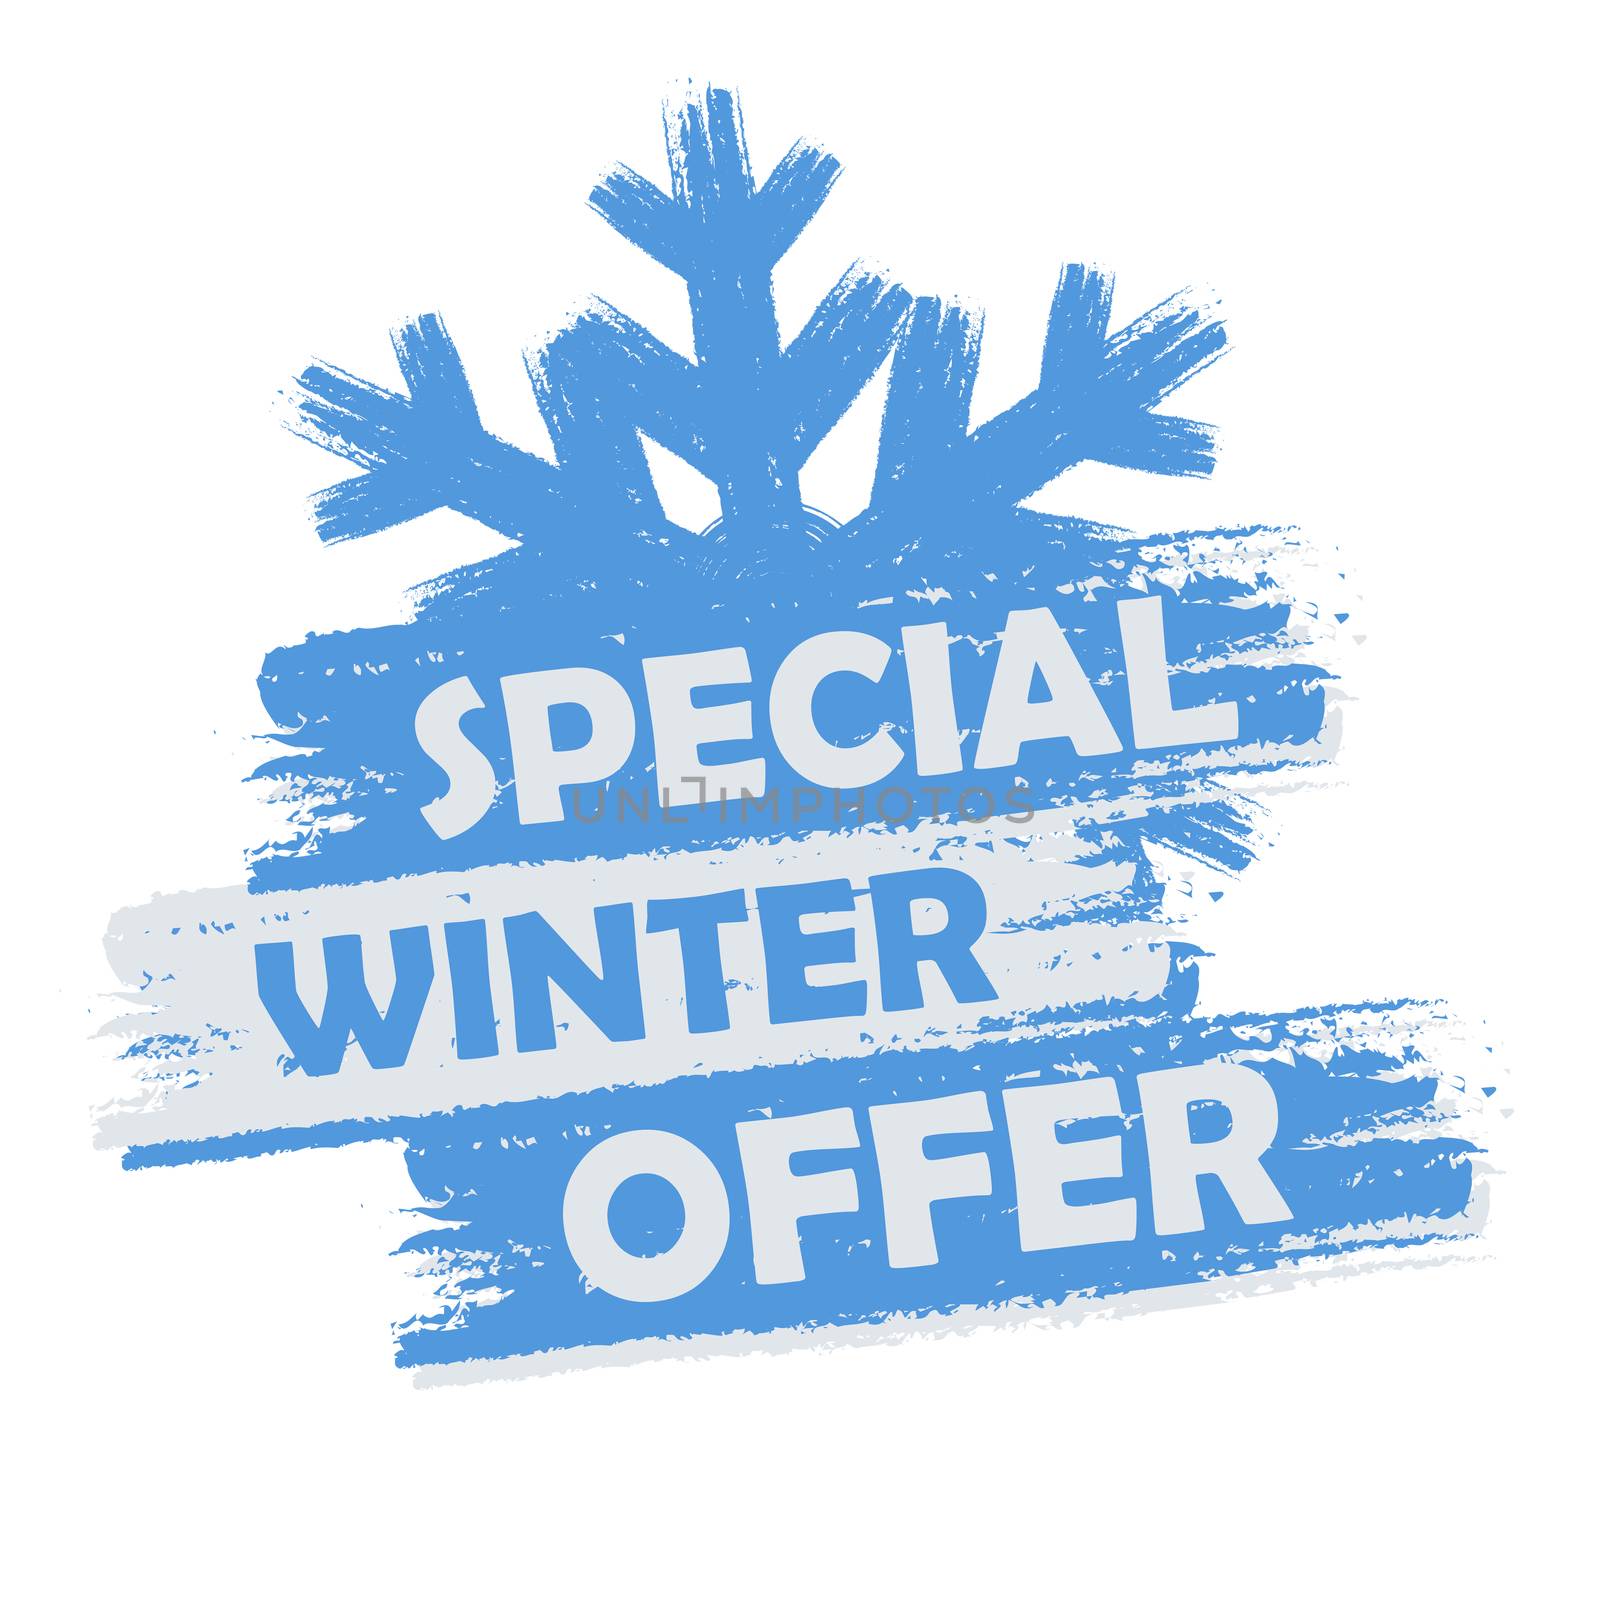 special winter offer by marinini